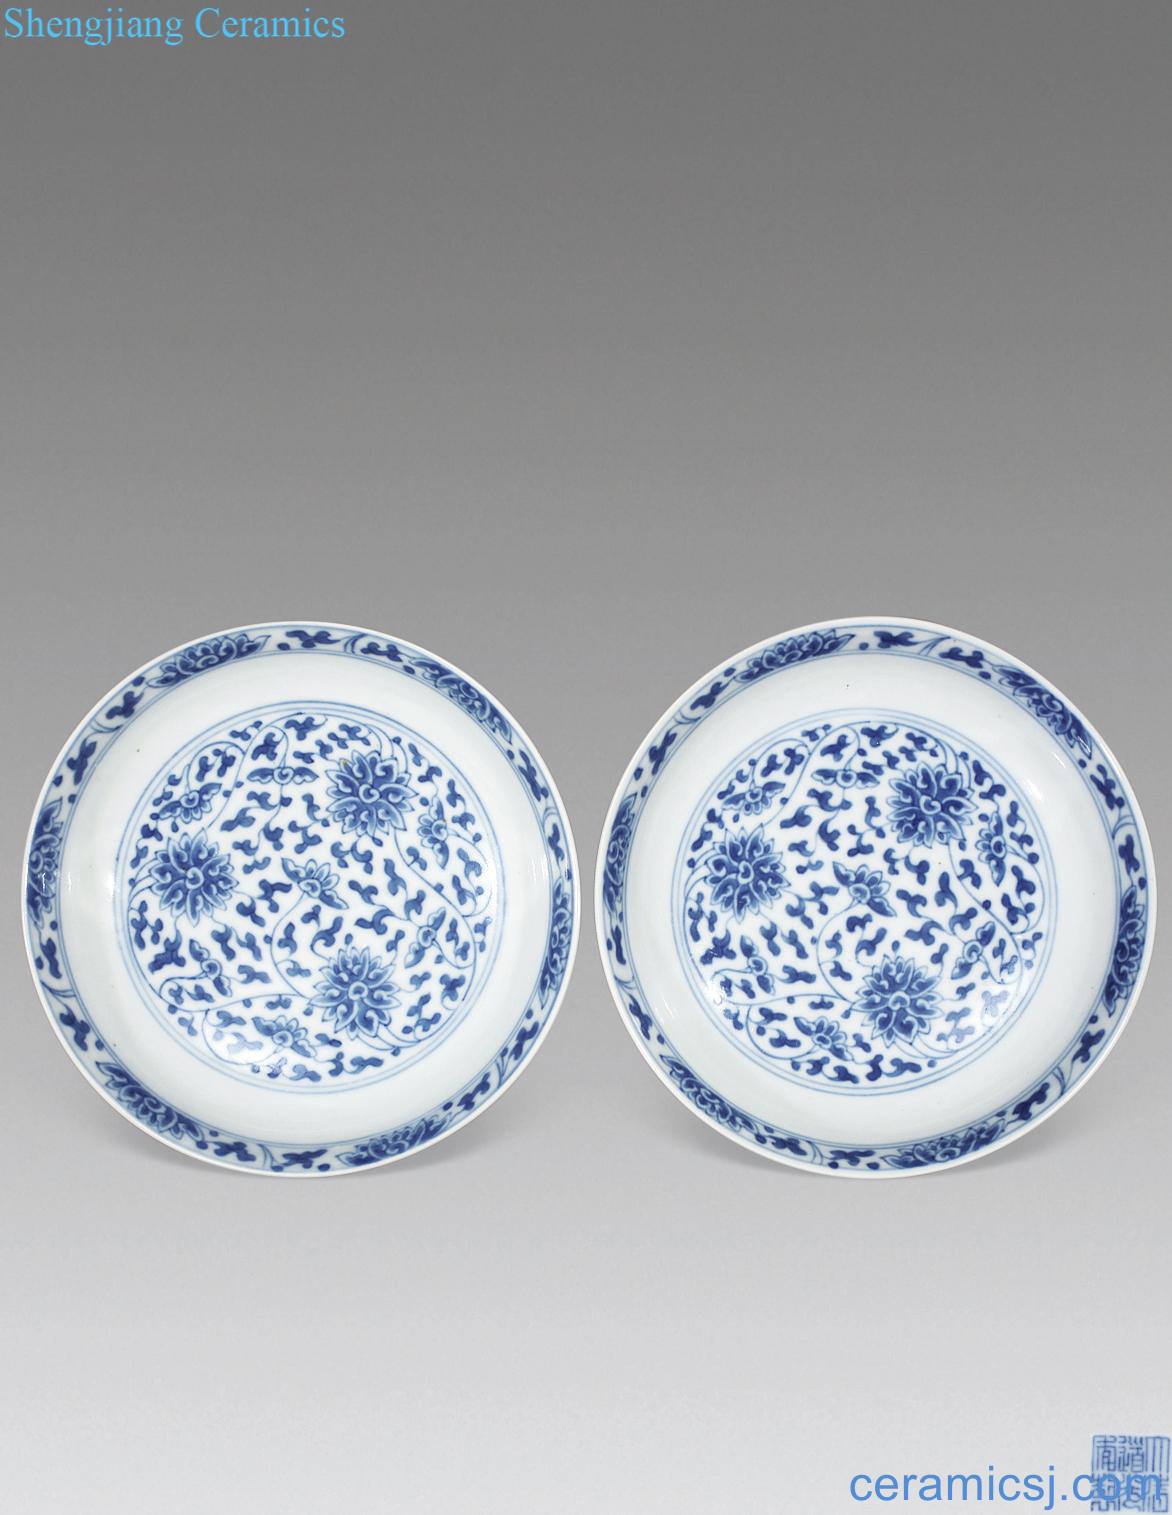 Qing daoguang Blue and white flower plate (a)